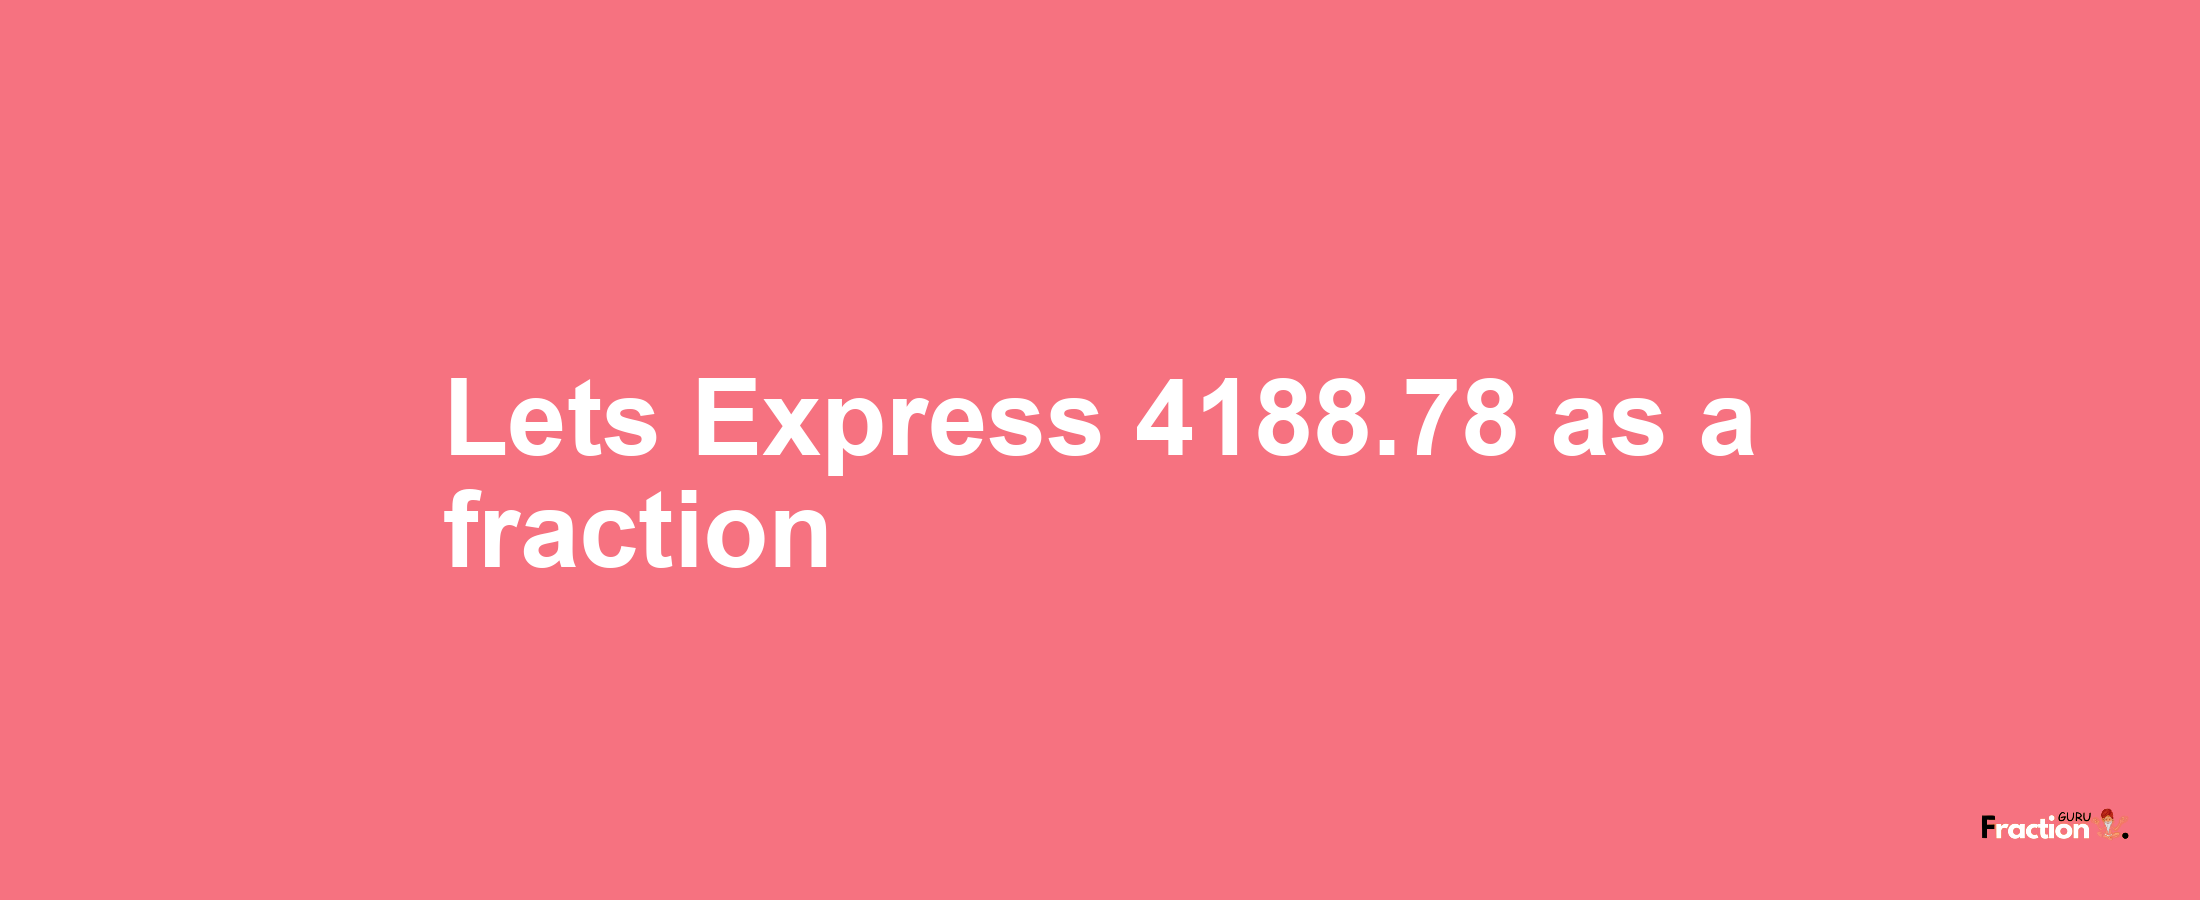 Lets Express 4188.78 as afraction